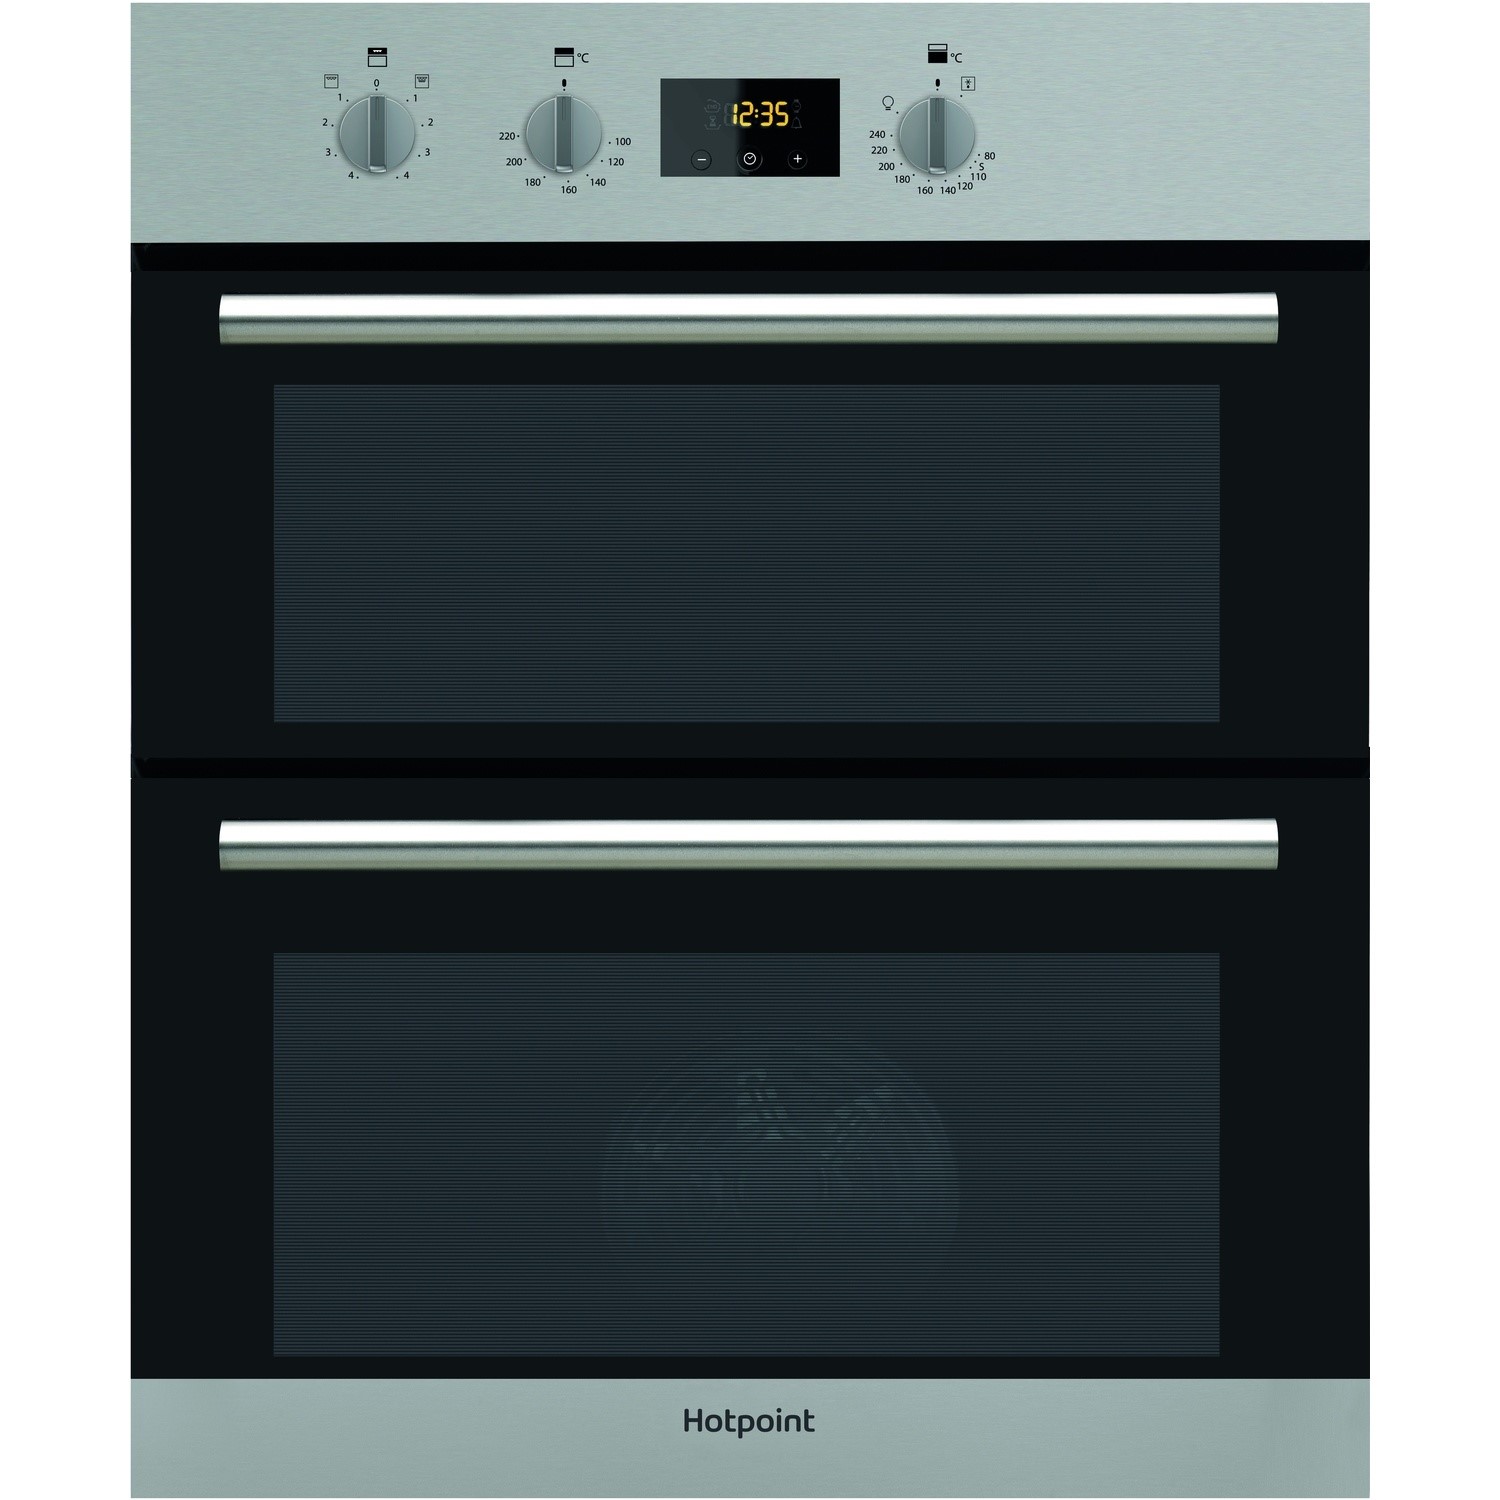 Hotpoint Class 2 DU2540IX Built Under Electric Double Oven With Feet - Stainless Steel - A/A Rated